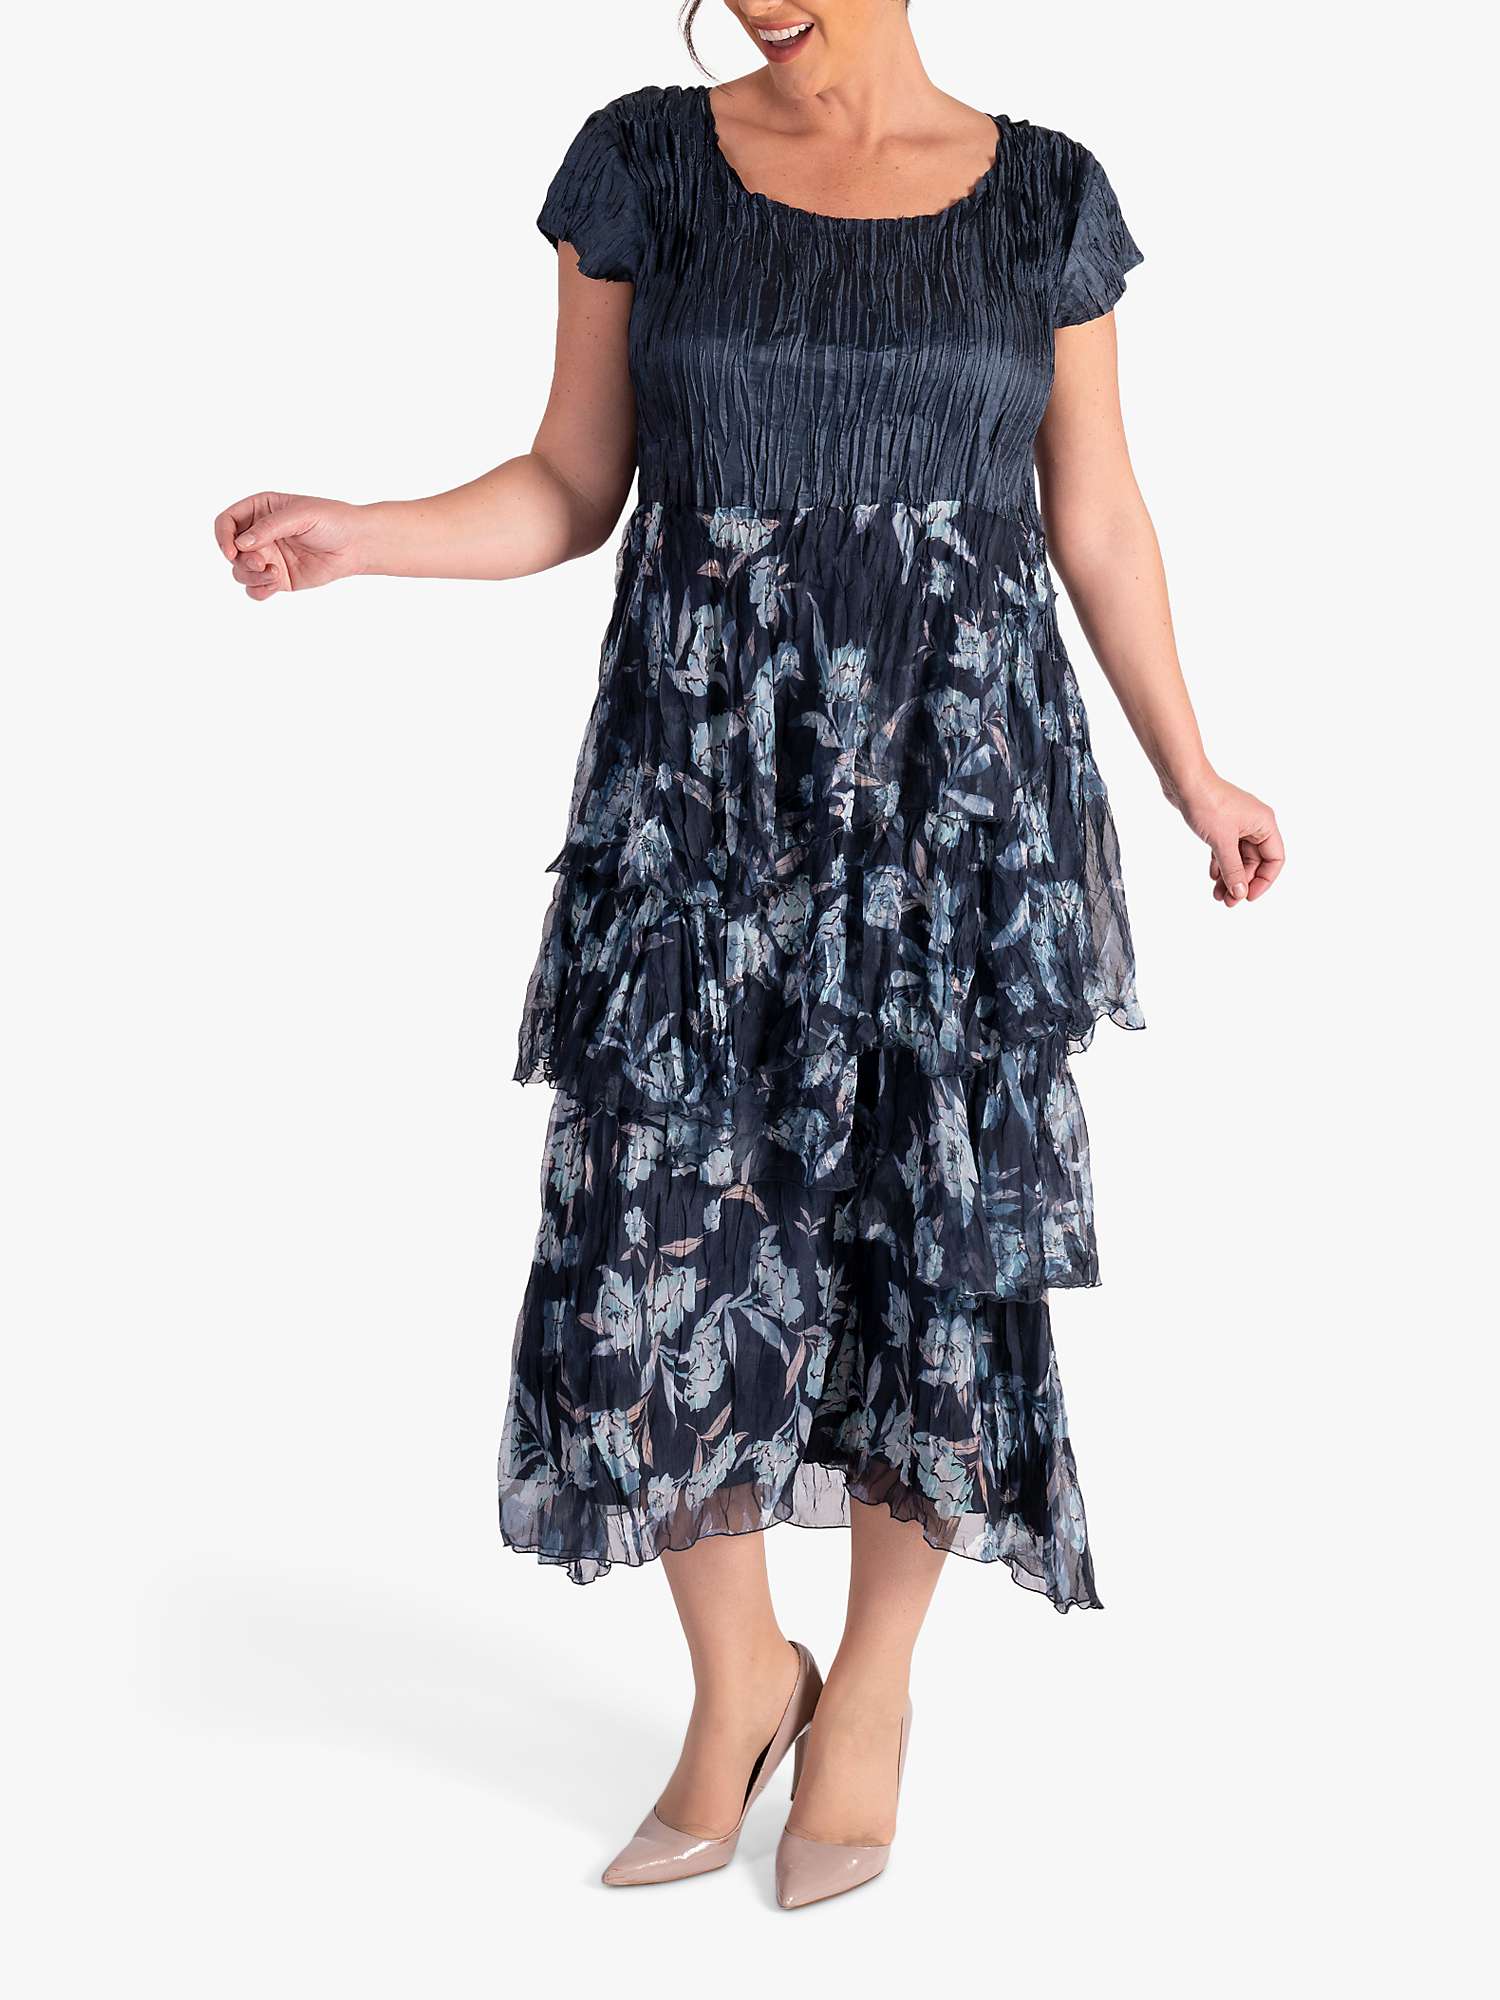 Buy chesca Floral Satin Chiffon Dress, Navy/Multi Online at johnlewis.com